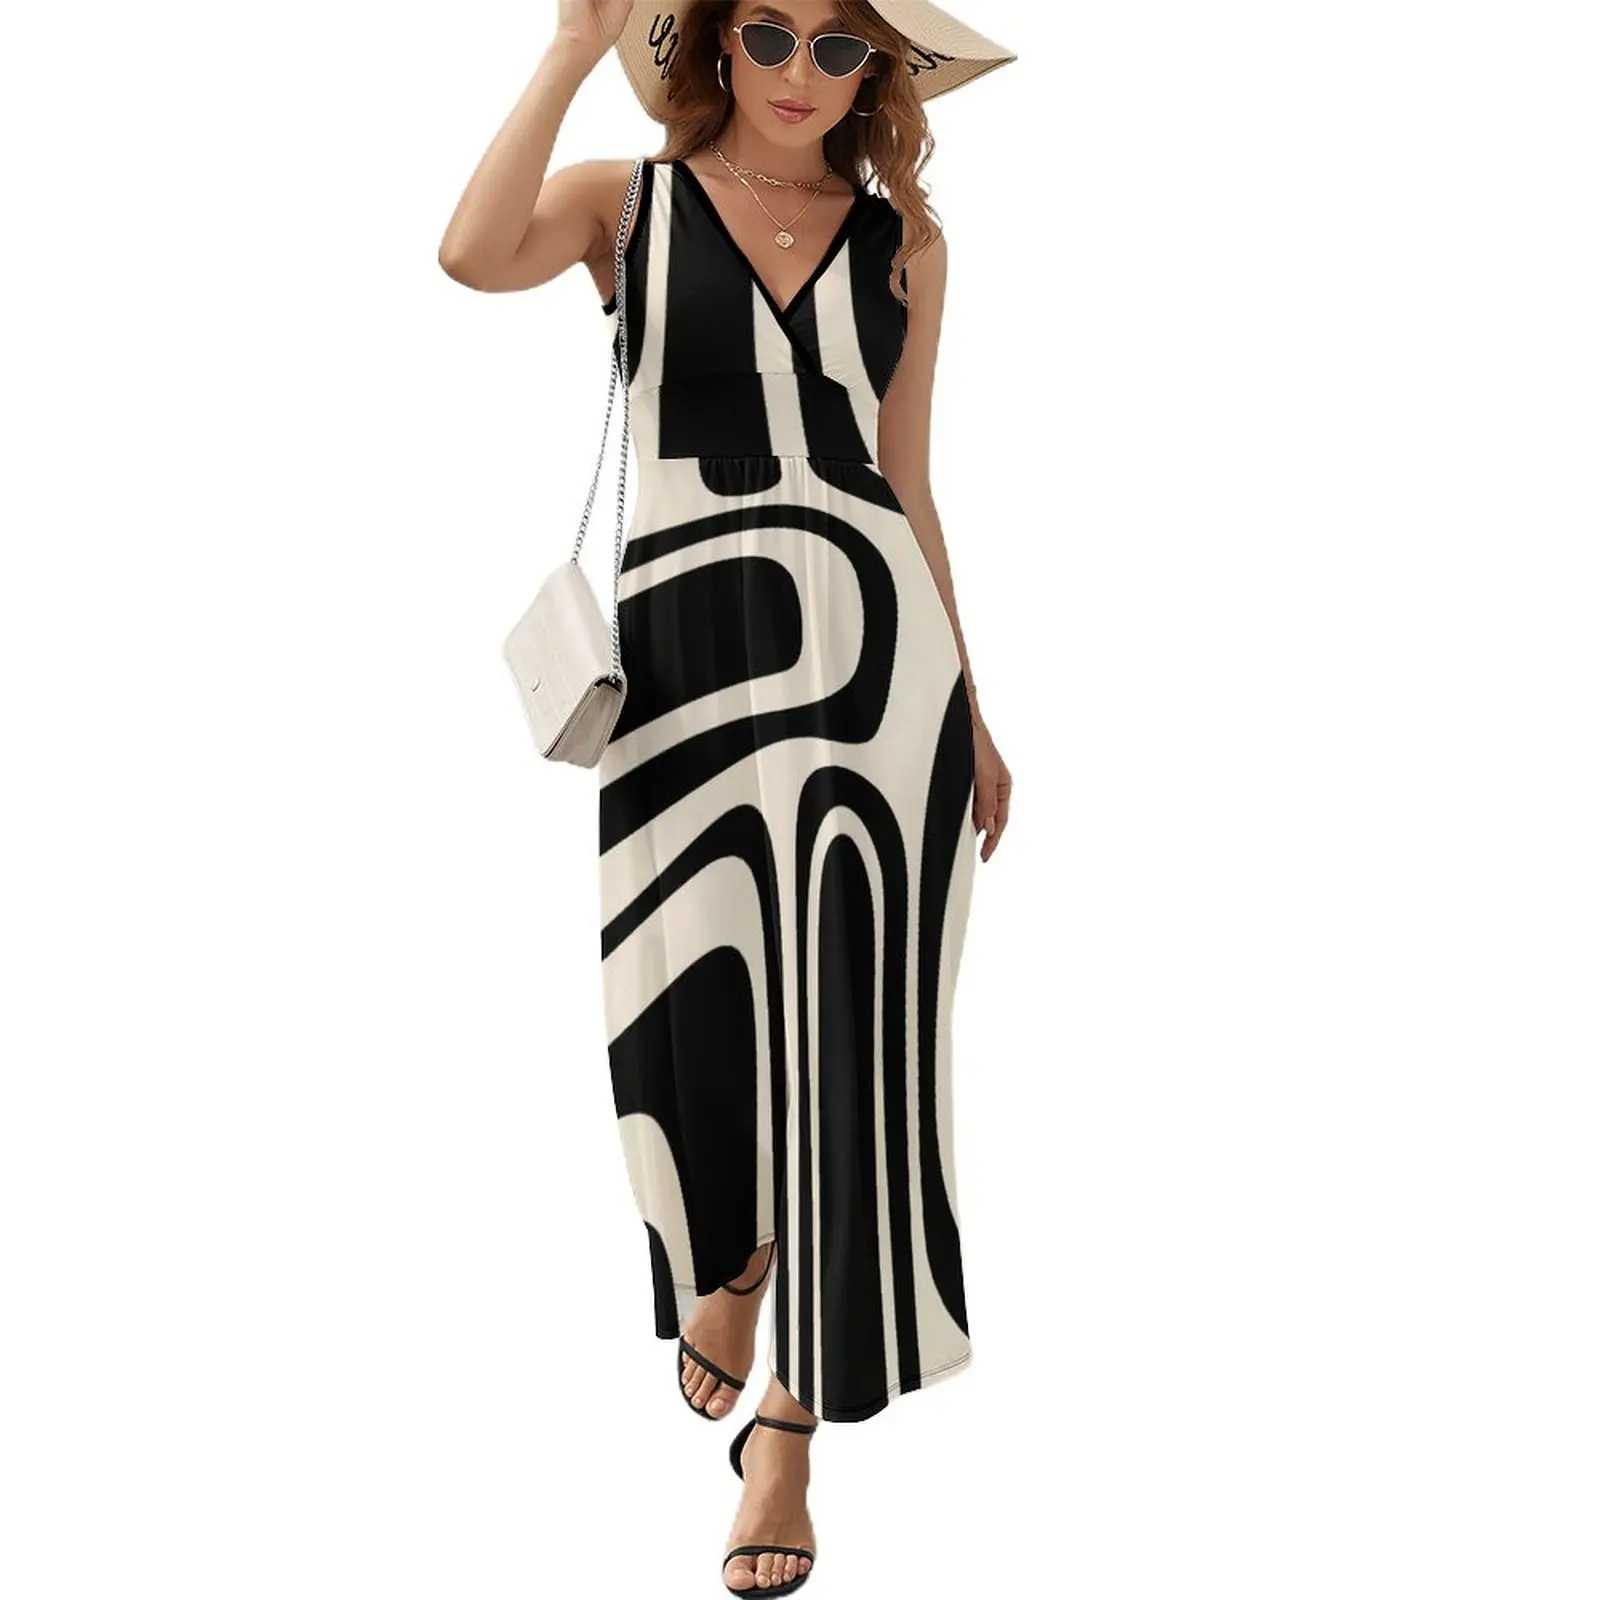 

Palm Springs Retro Midcentury Modern Abstract Pattern in Black and Almond Cream Sleeveless Dress dresses ladies 2023 summer